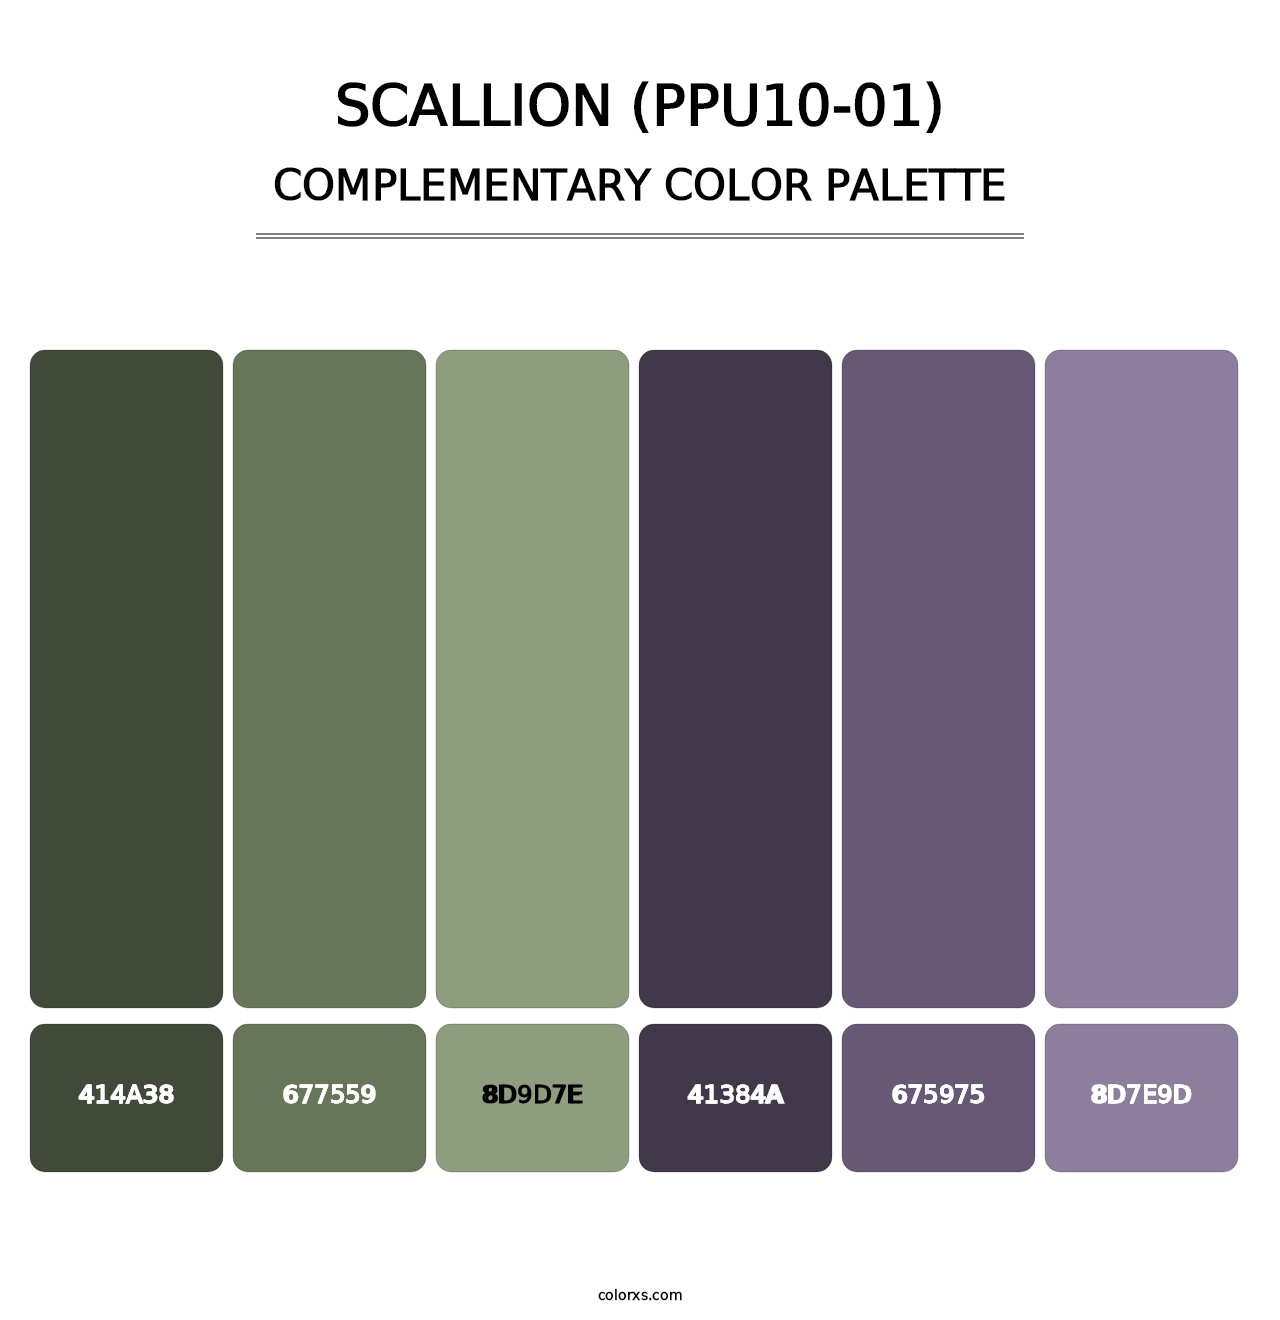 Scallion (PPU10-01) - Complementary Color Palette